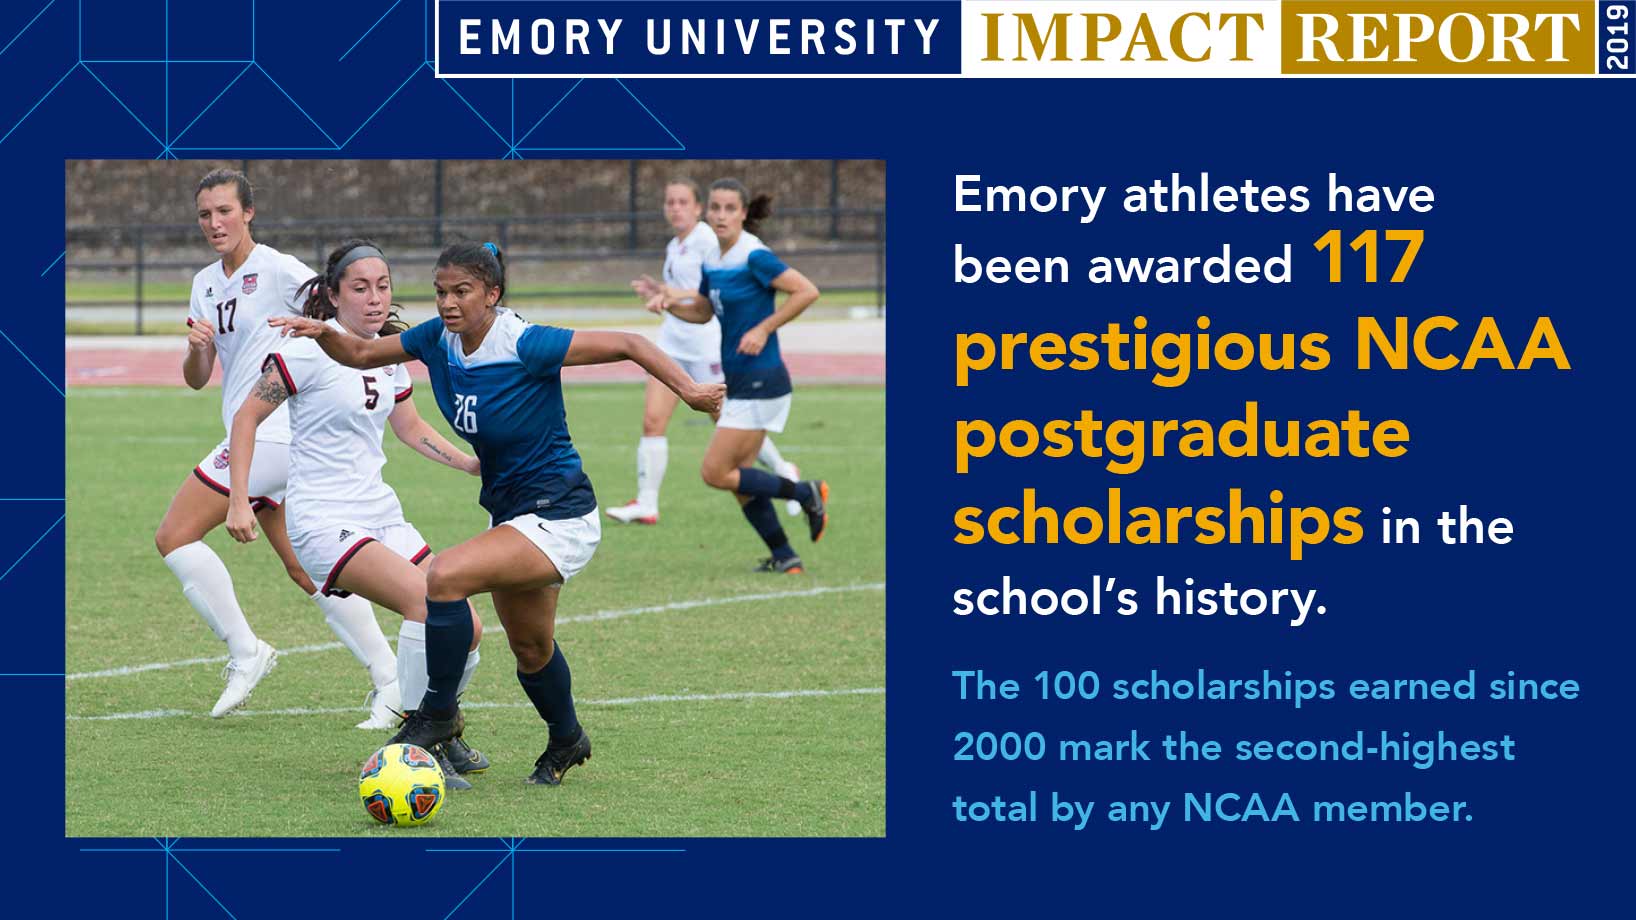 Emory athletes have  been awarded 117 prestigious NCAA postgraduate scholarships in the school's history. The 100 scholarships earned since 2000  mark the second-highest total by any NCAA member.